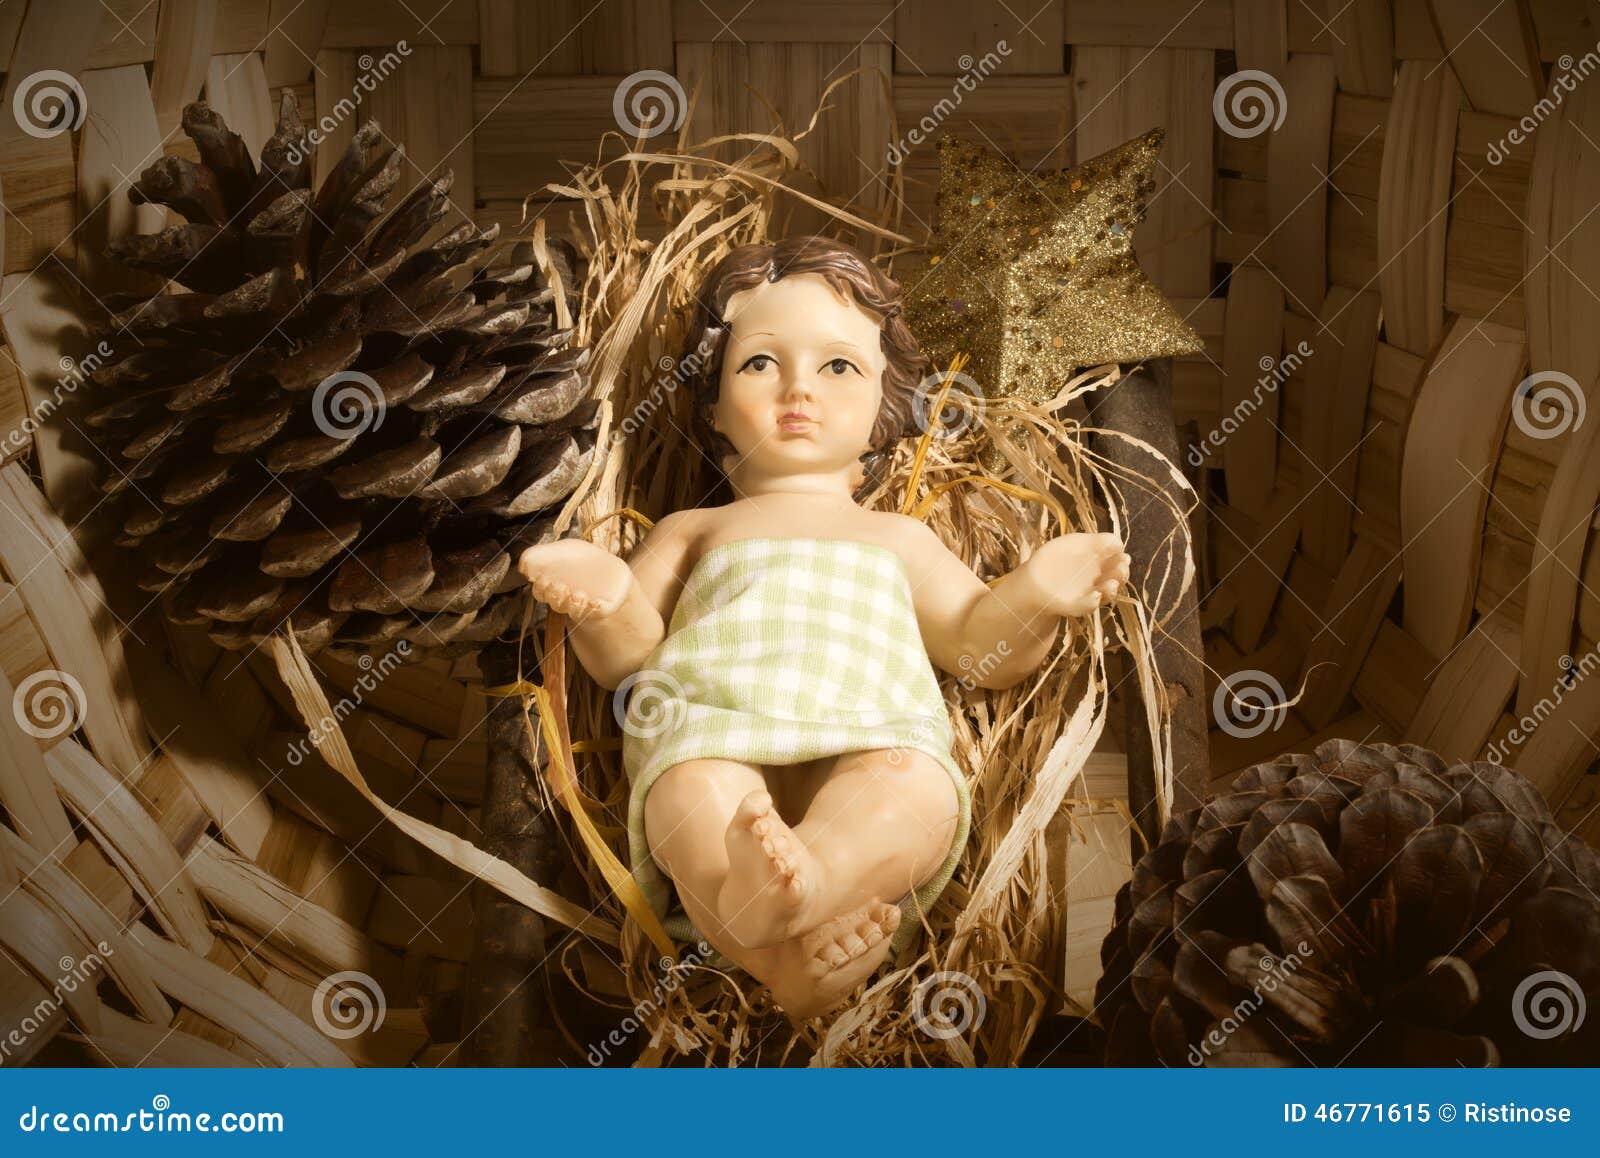 Download Baby Jesus In The Crib Christmas Card Stock Image Image of background rustic